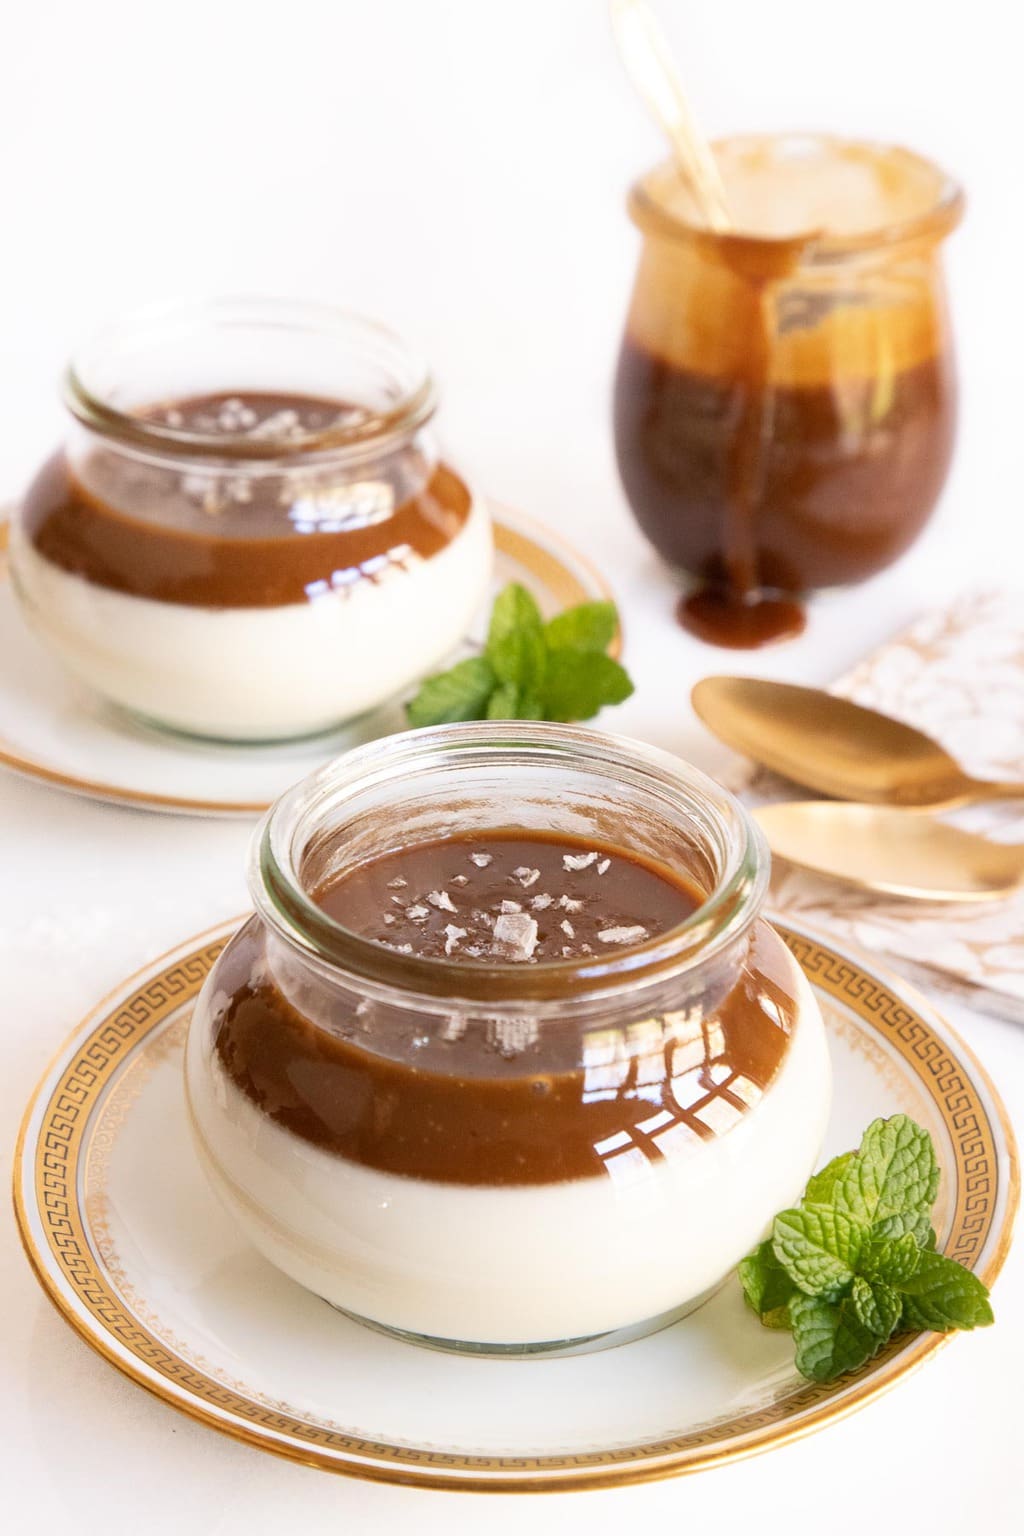 Vertical photo of glass Weck jars filled with Salted Butterscotch Panna Cotta on gold rimmed serving plates.